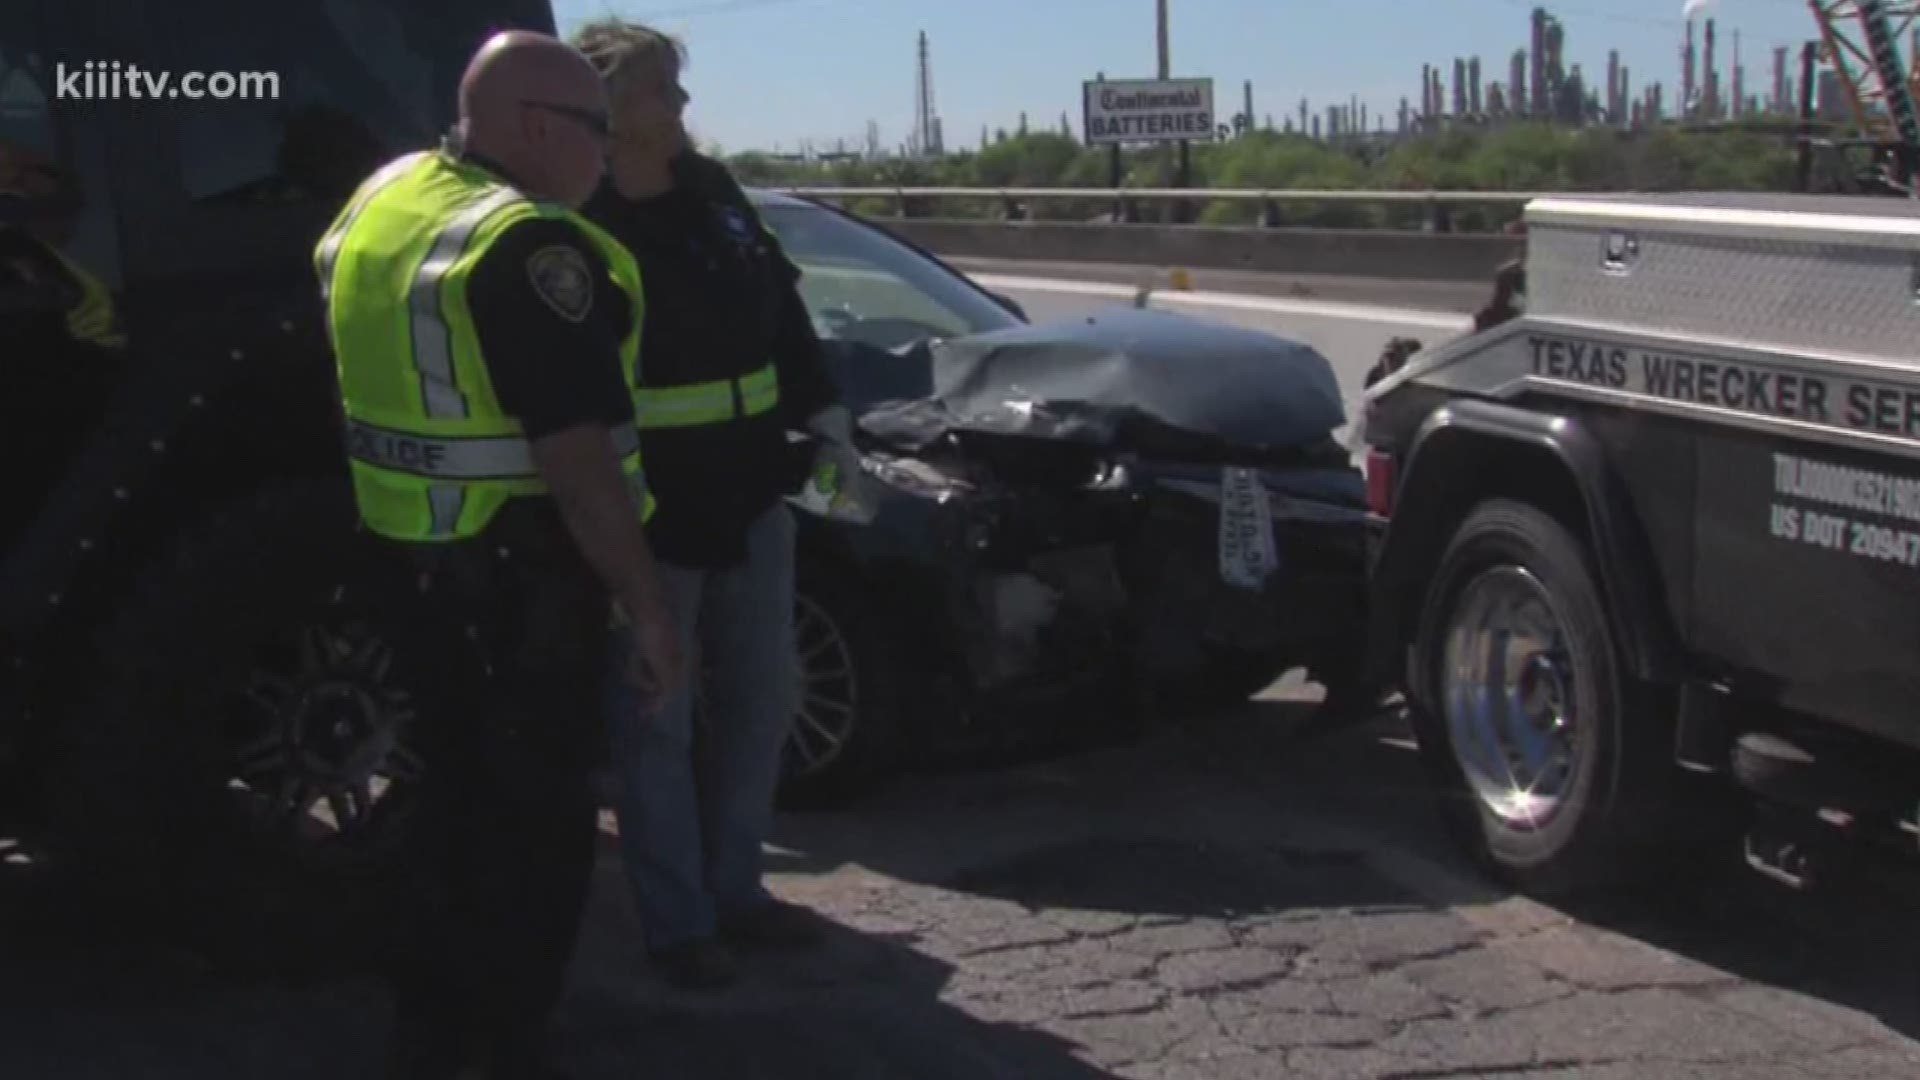 It happened around 4 p.m. when a car smashed into a stalled vehicle causing a chain reaction.